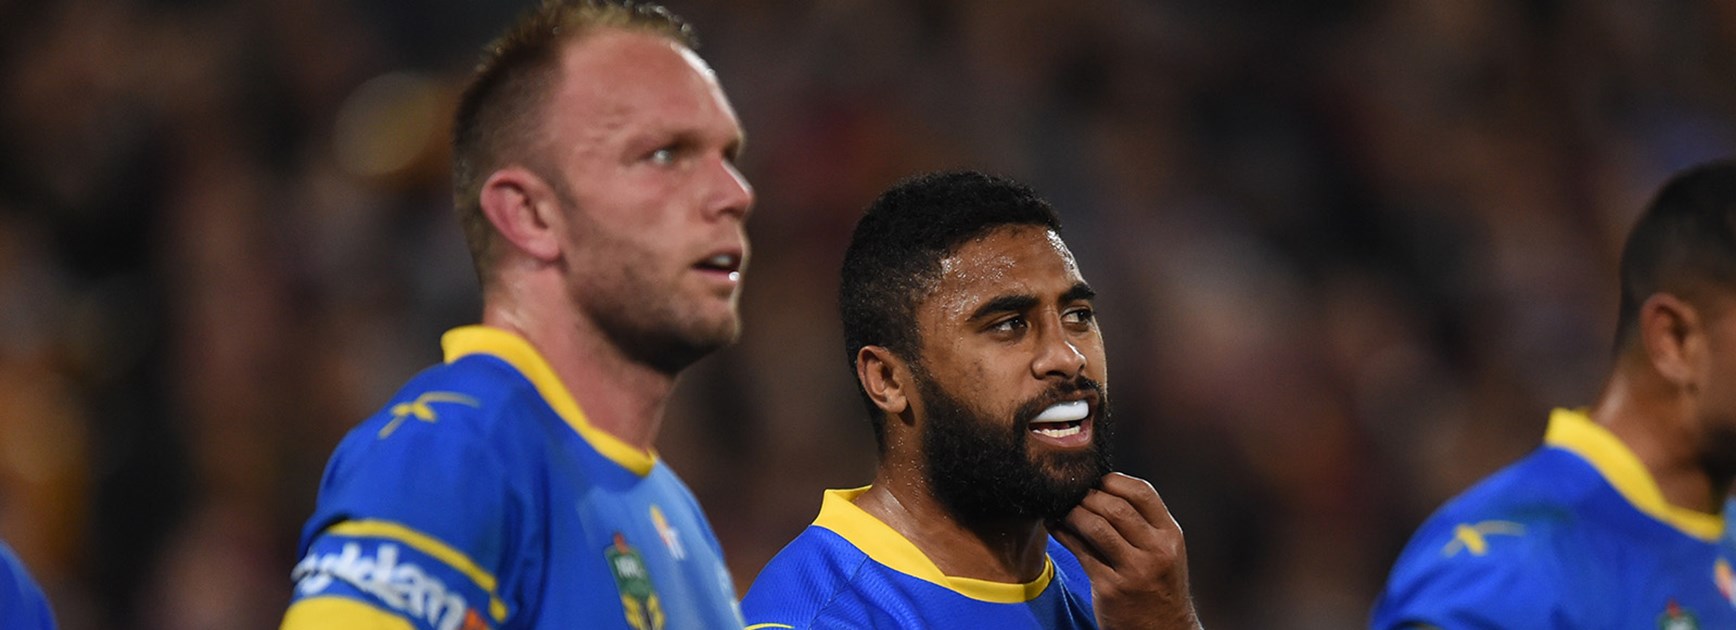 The Eels look on dejected after another Broncos try.